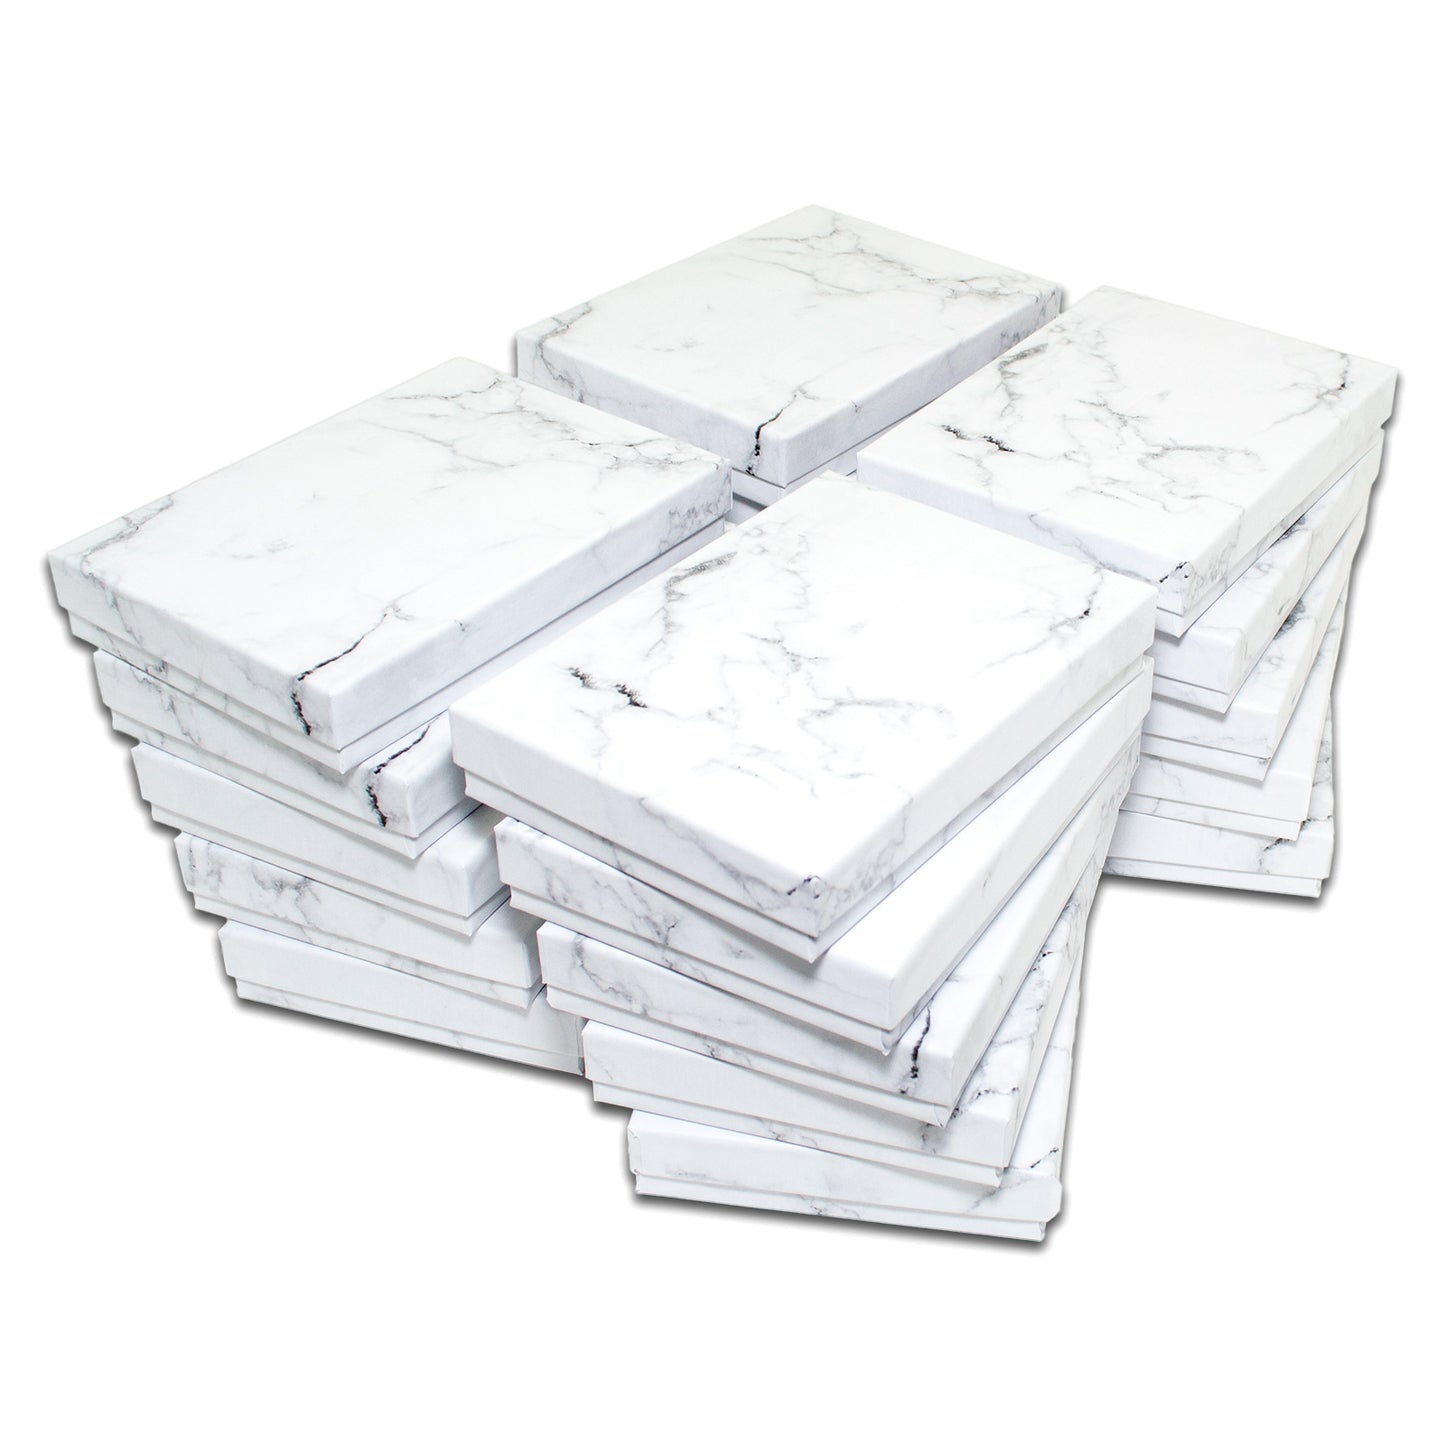 5 7/16" x 3 15/16" x 1" Marble White Cotton Filled Paper Box